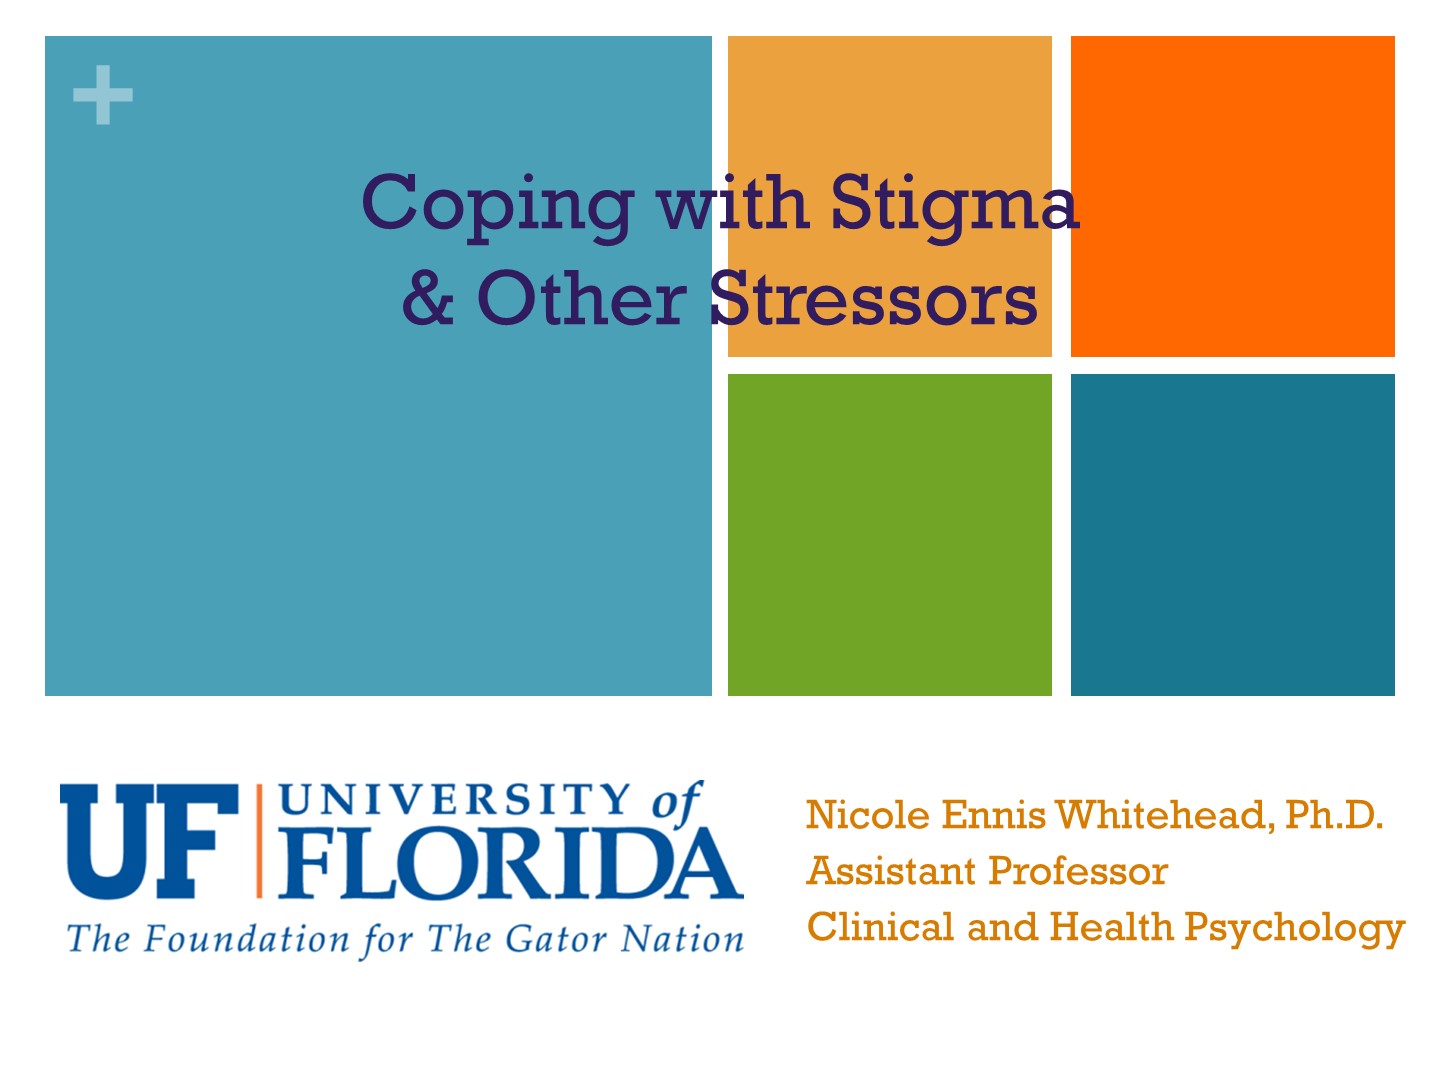 Coping with Stigma & Other Stressors